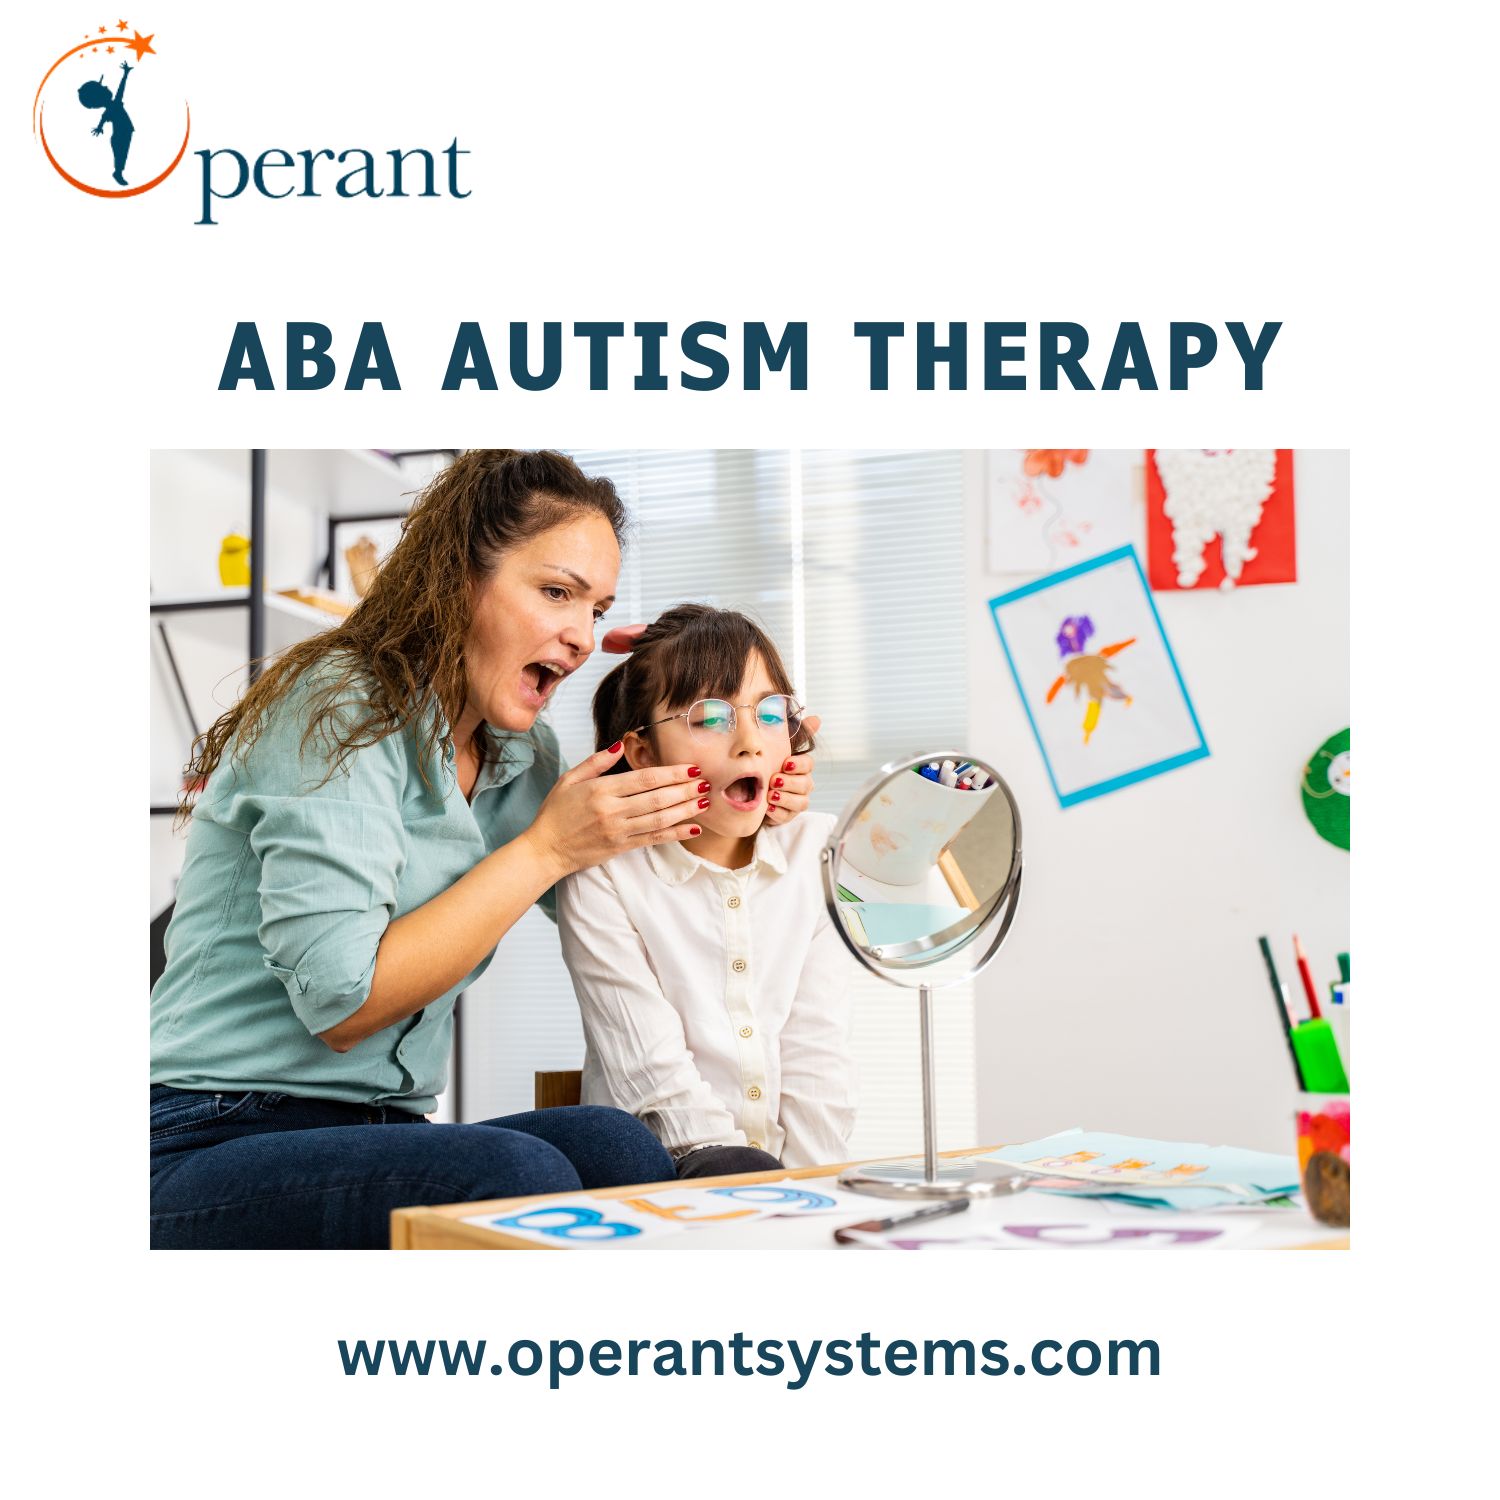 ABA Autism Therapy